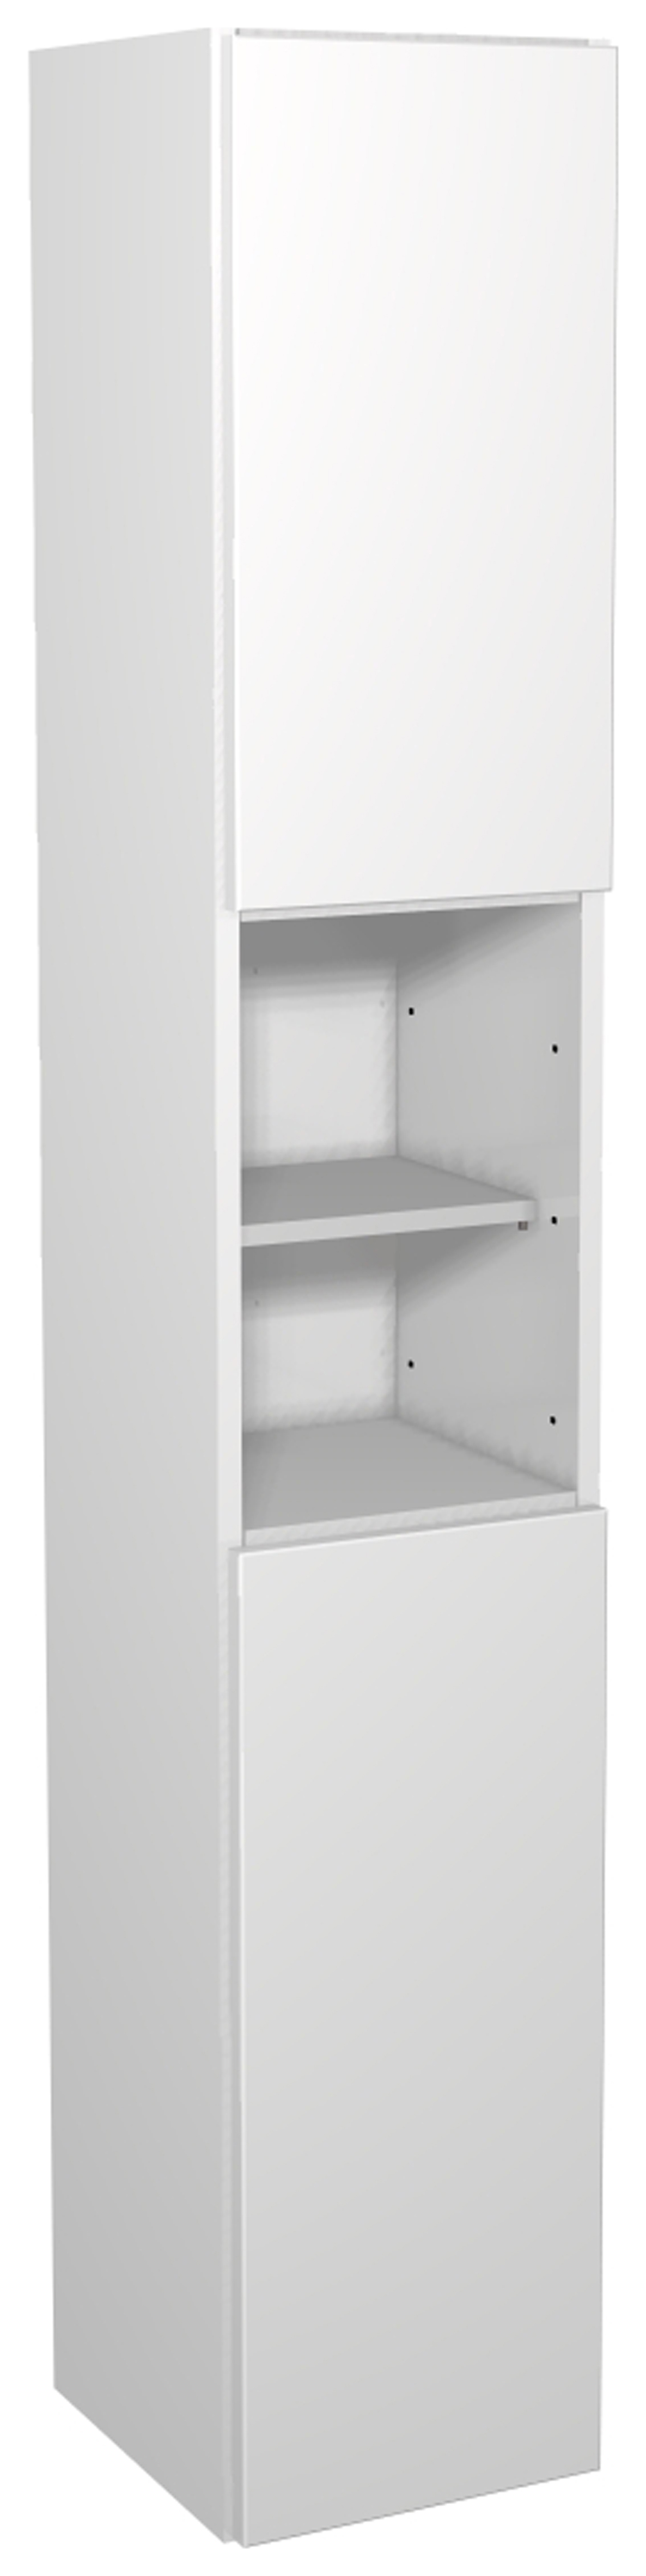 Image of Wickes Vienna Modern Tower Unit, in White, Size: 300x1762mm